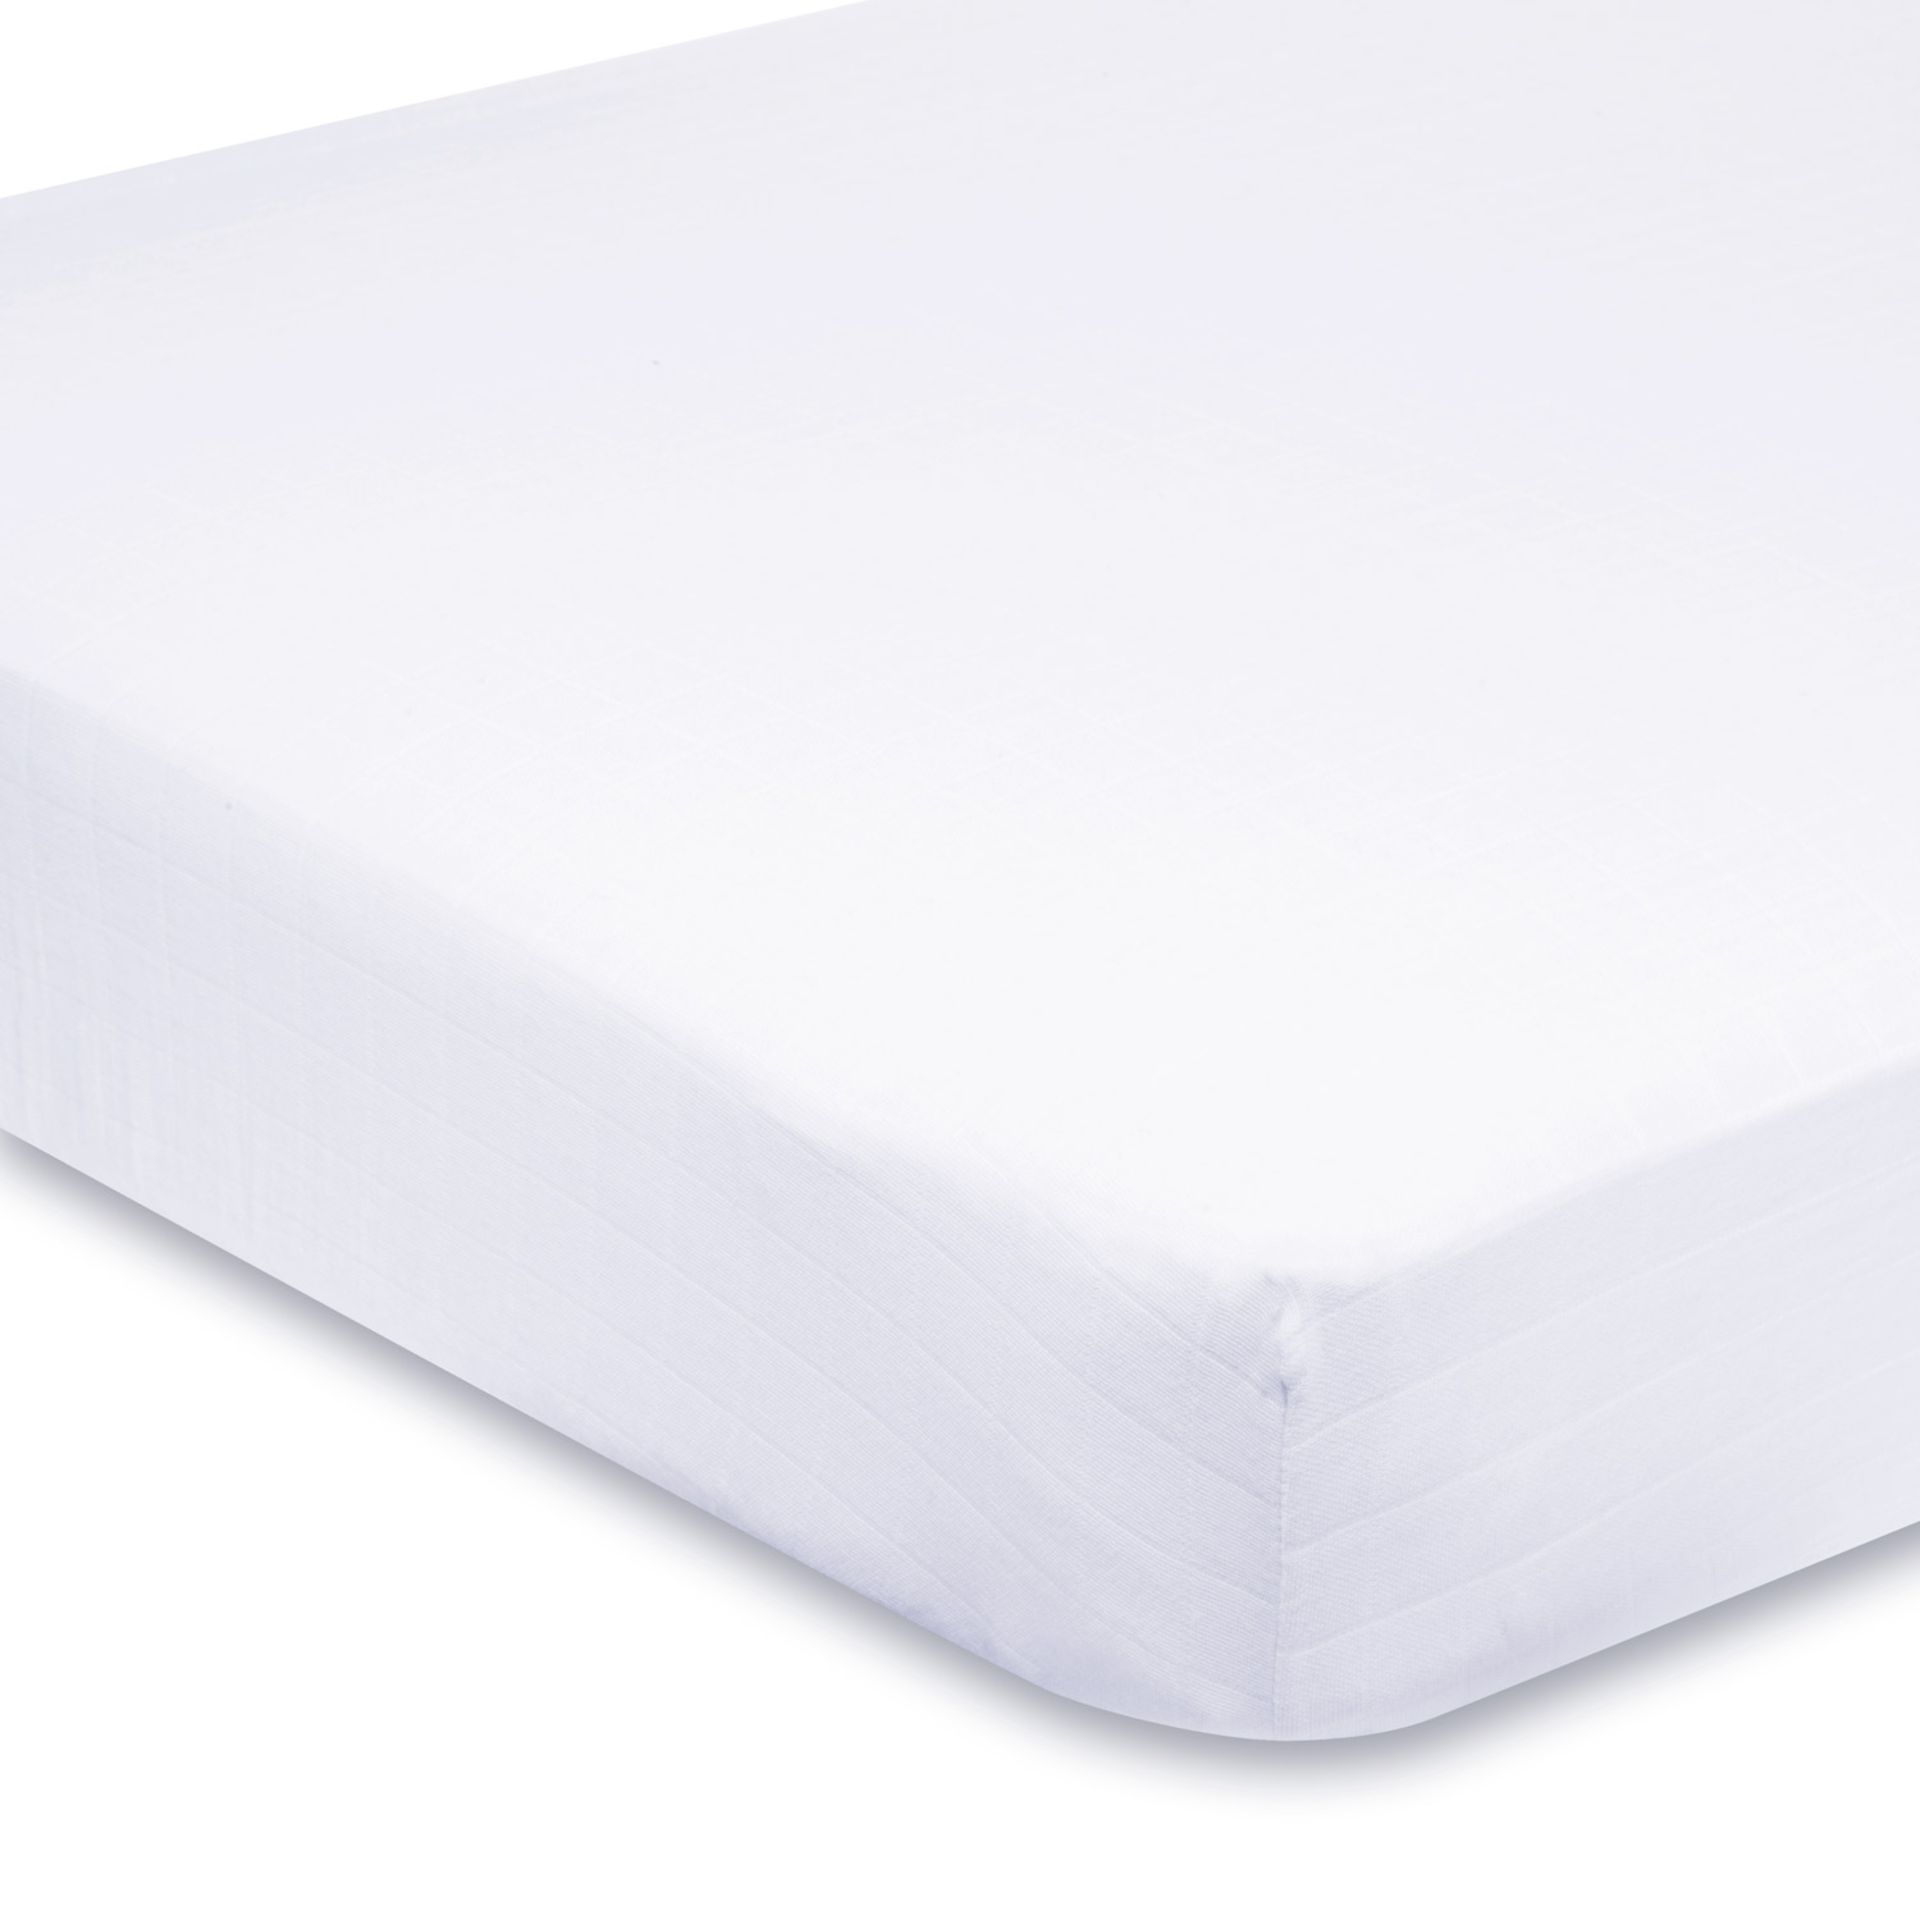 V *TRADE QTY* Brand New Luxury Egyptian Fitted Double Sheet - White X 4 YOUR BID PRICE TO BE